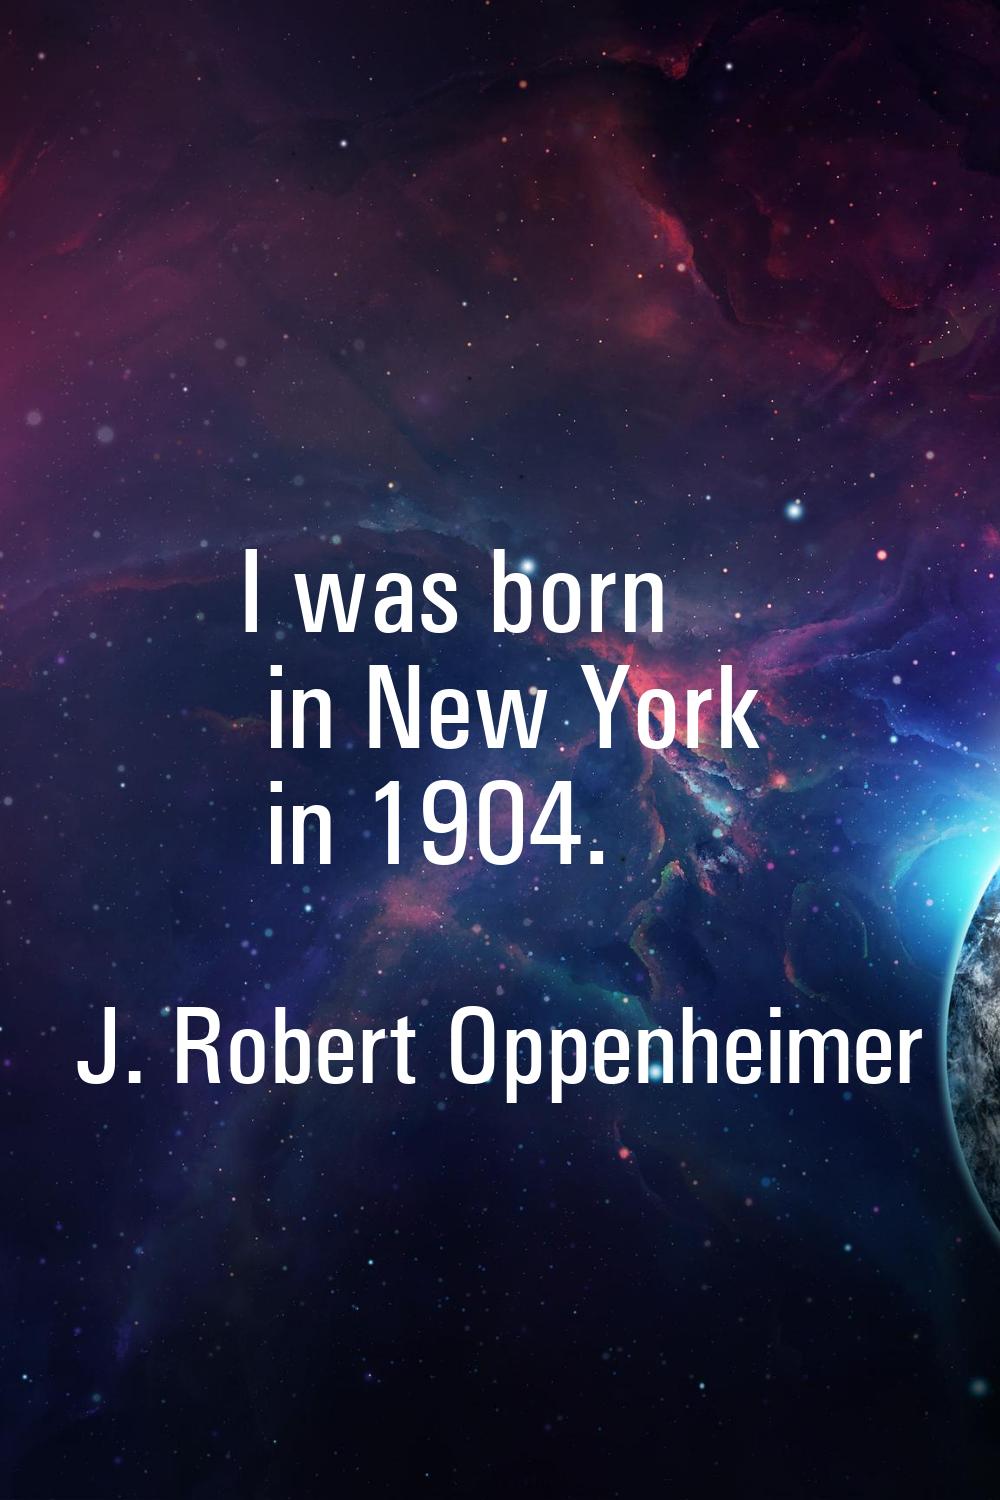 I was born in New York in 1904.